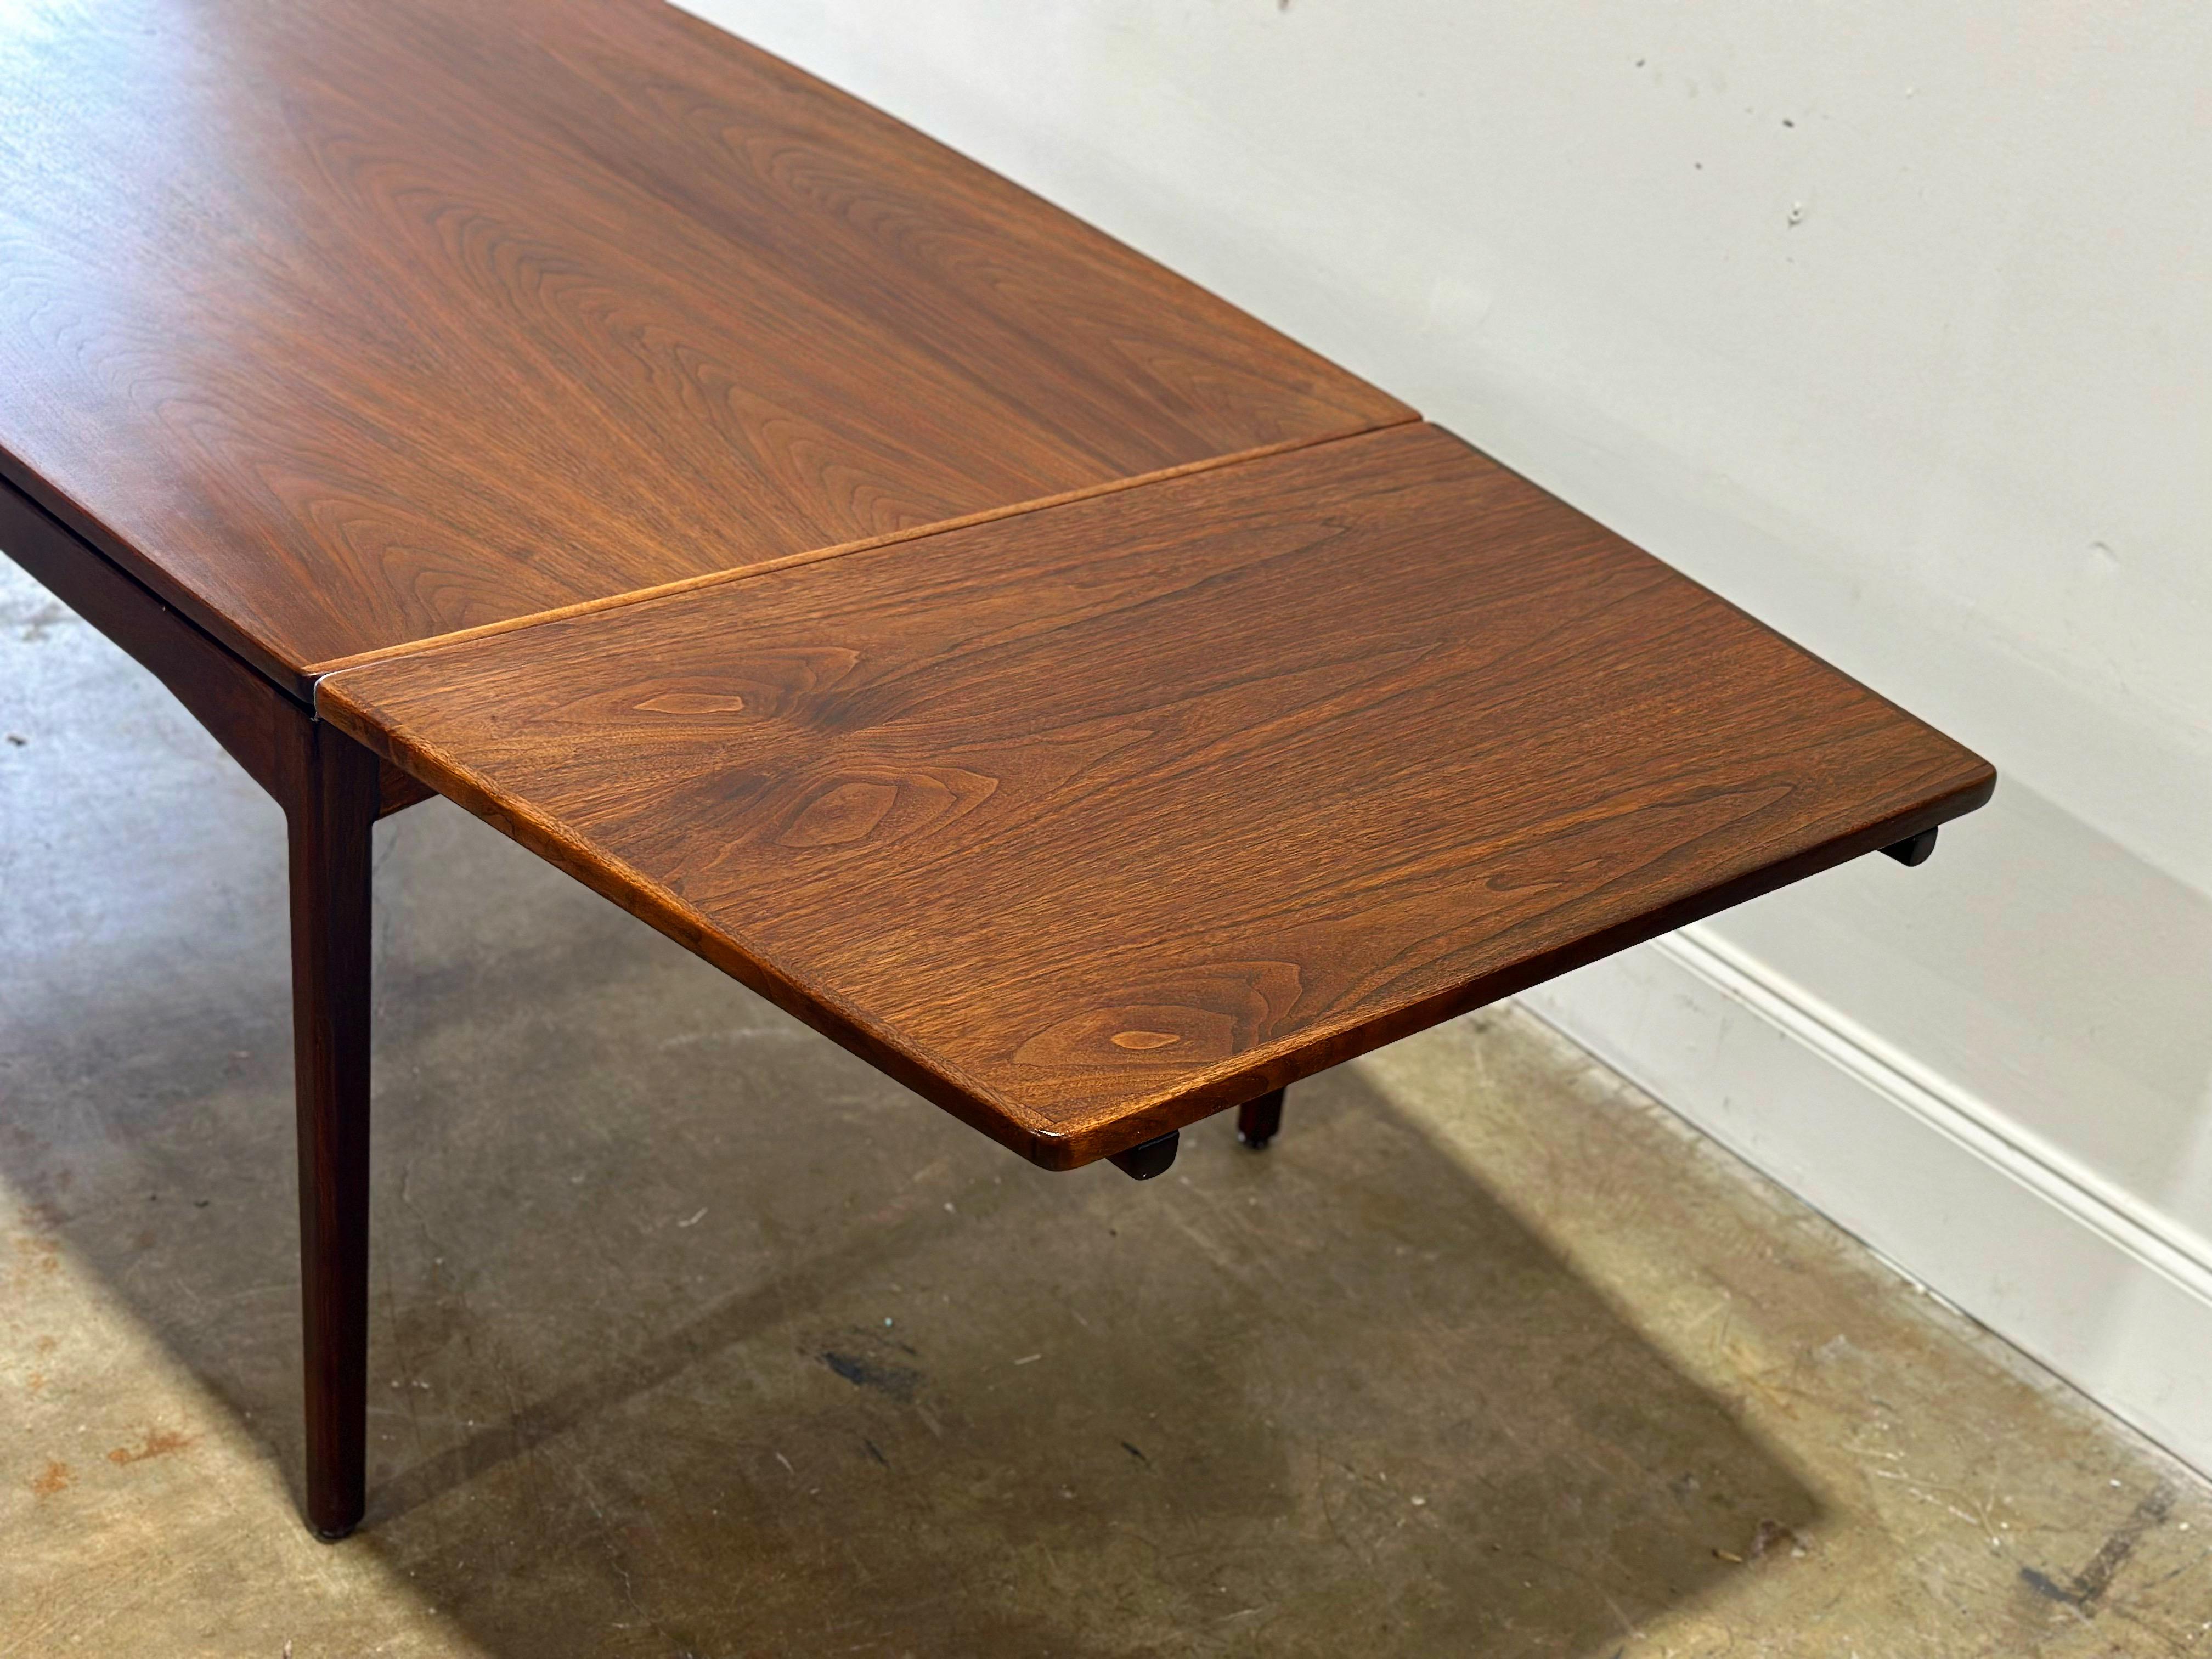 Stunning and rare large scale Mid-Century Modern dining table designed by Jens Risom for Jens Risom Design Inc. The table has two draw leaf leaves, which pullout from the narrow ends of the top, and store by tucking them under the top surface.